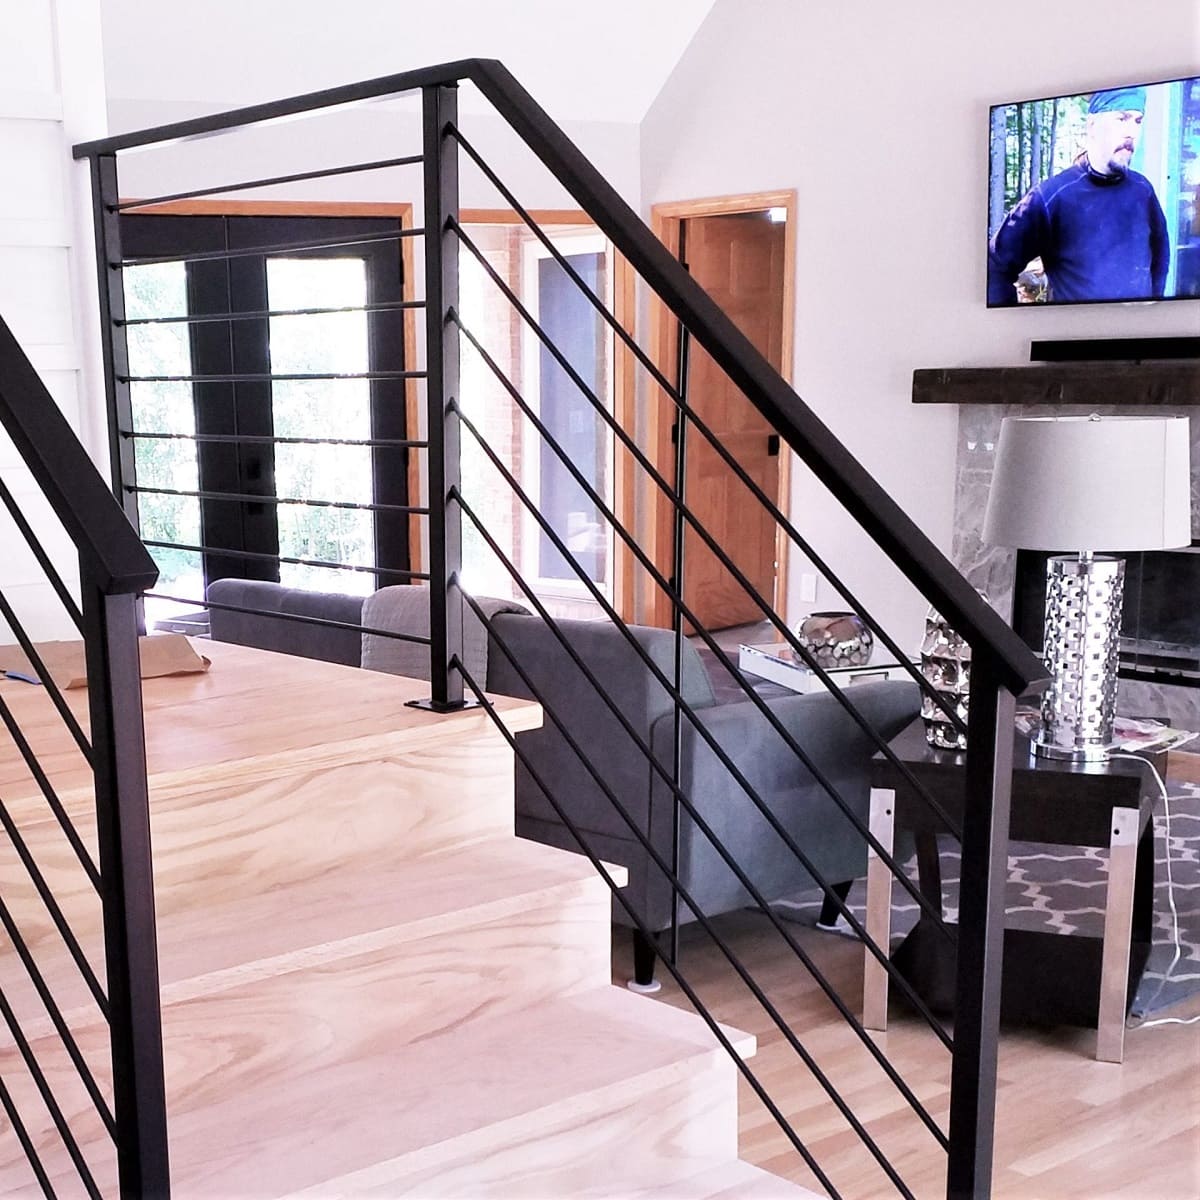 Where To Buy Railings For Stairs